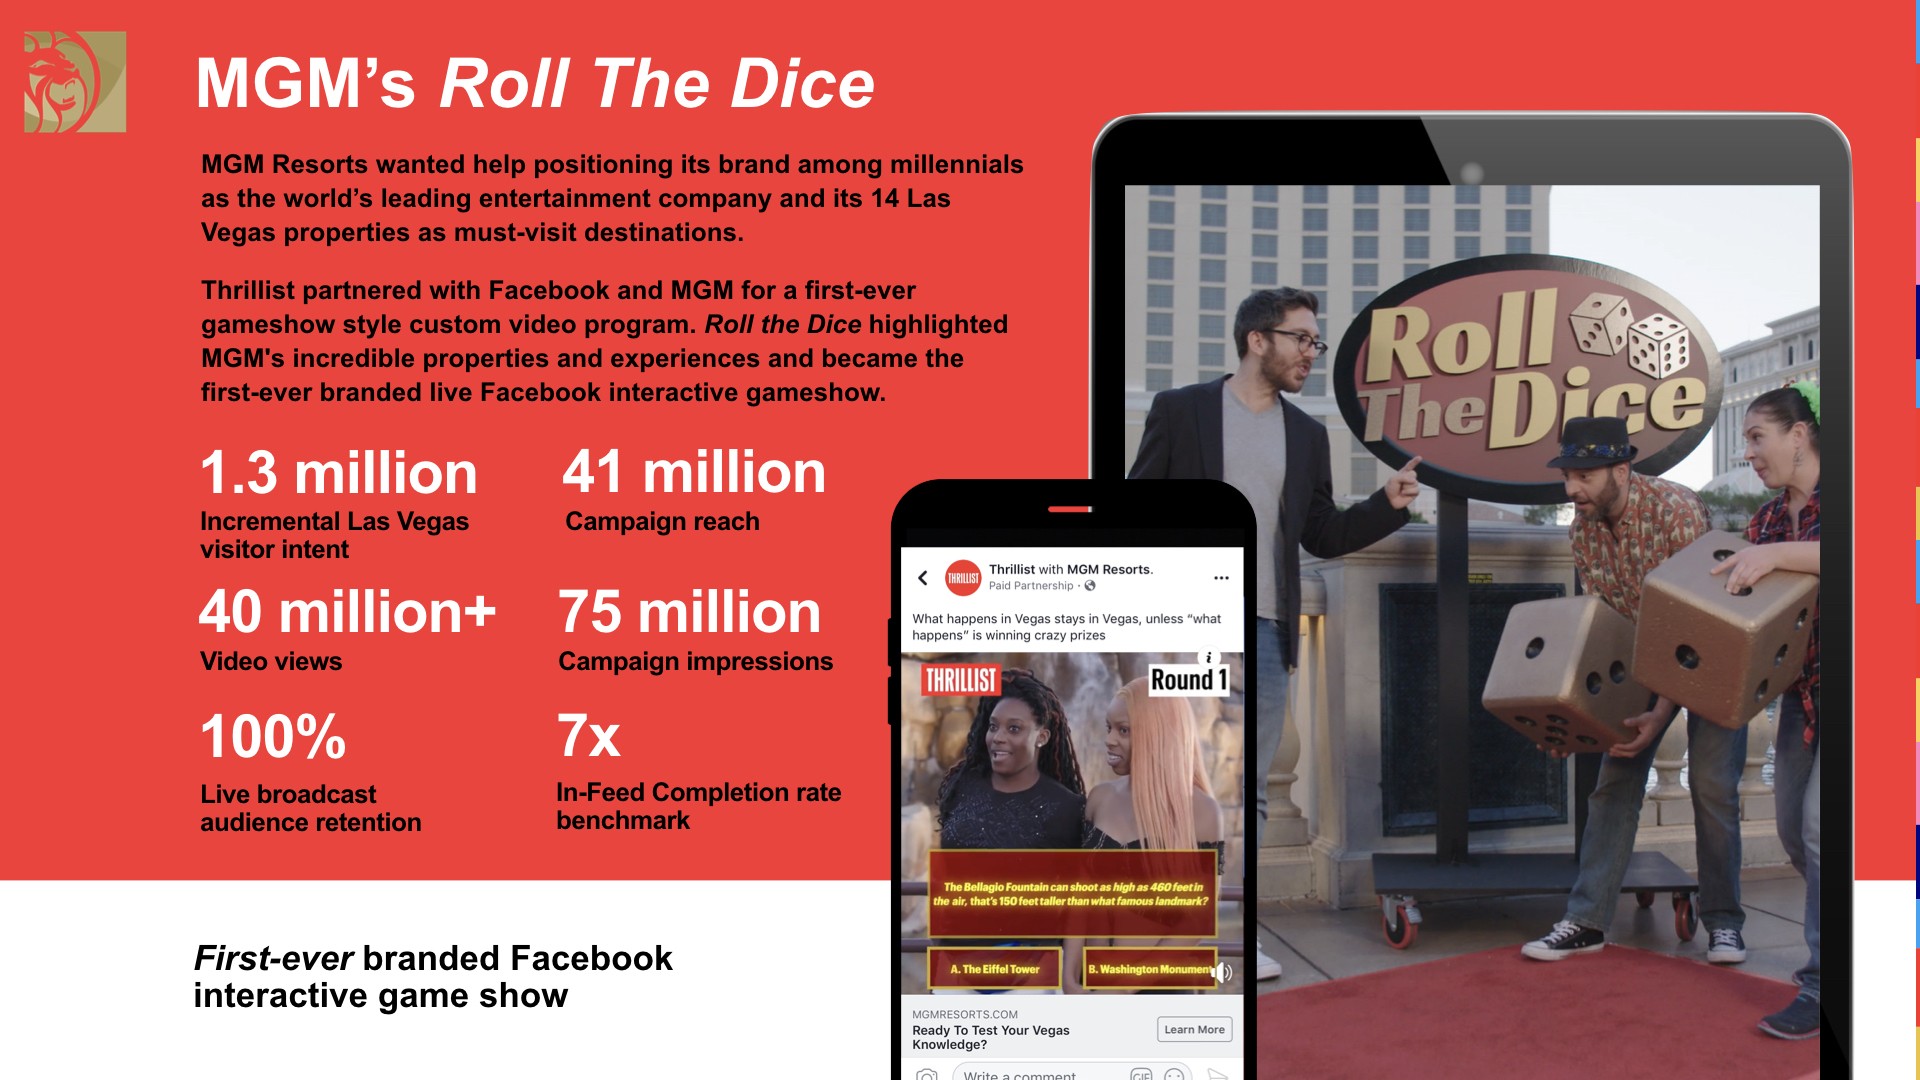 Thrillist x MGM's "Roll The Dice" on Facebook